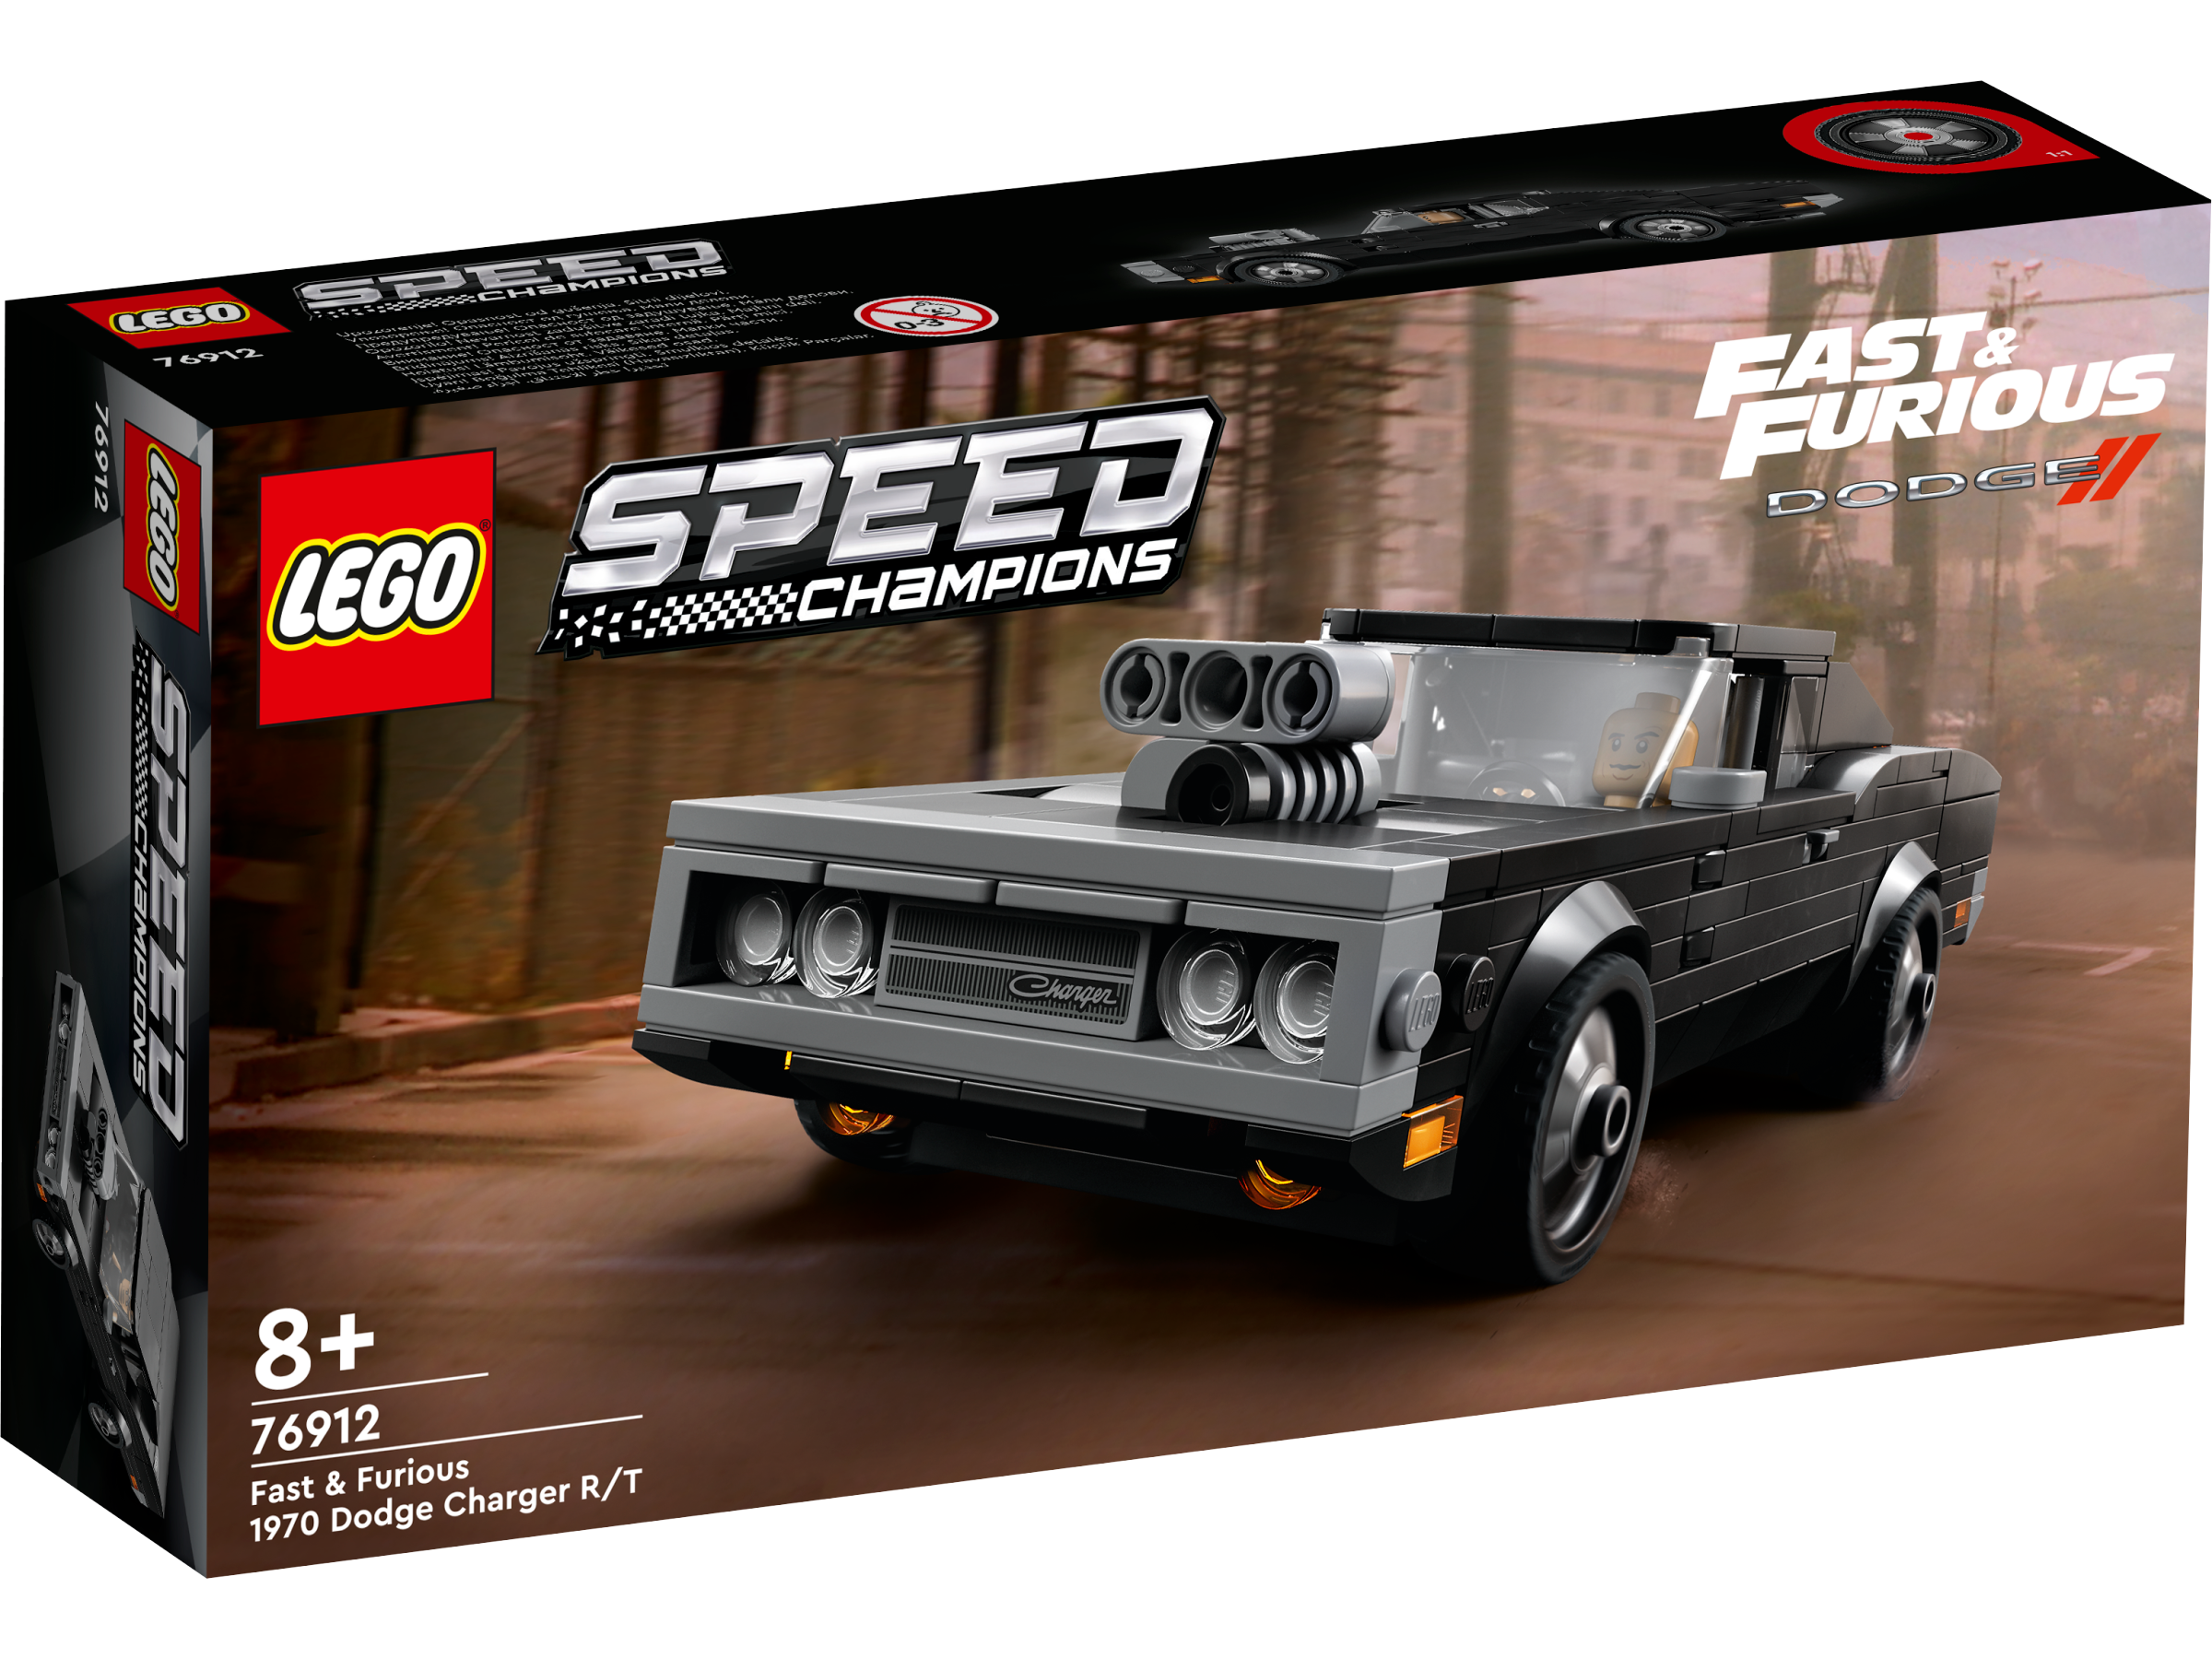 Speed Fast & Furious 1970 Dodge Charger R/T - 76912